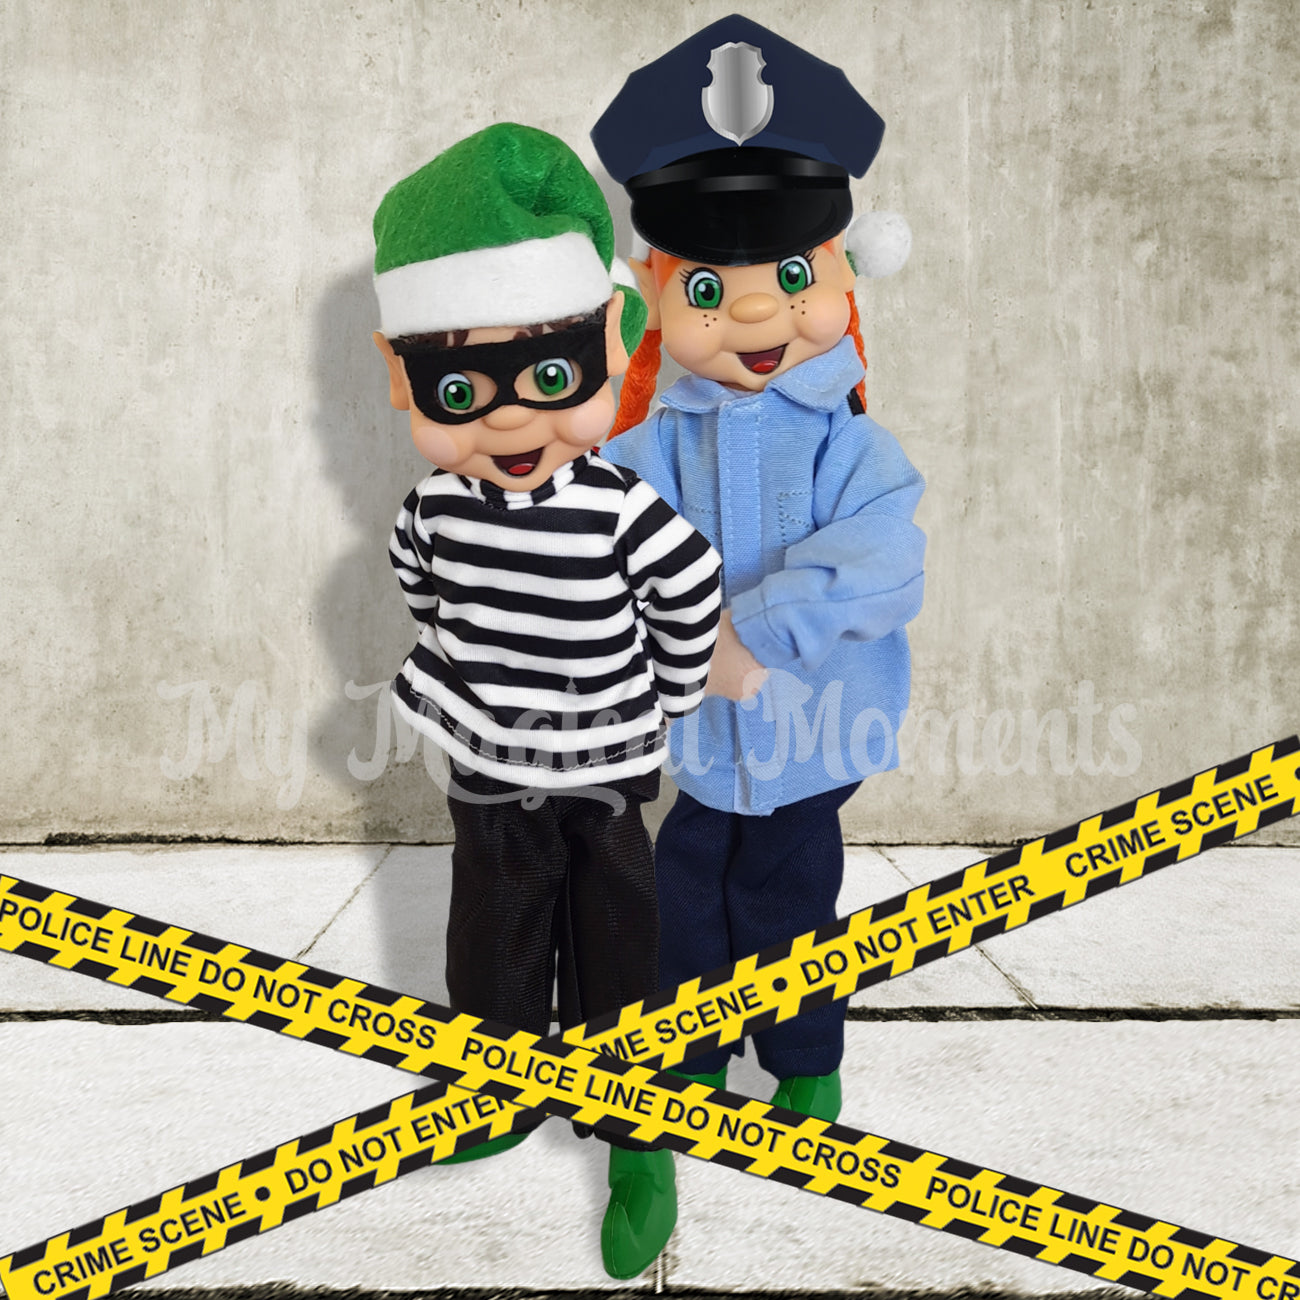 elf dressed as a police officer arresting a naughty elf with crime scene tape